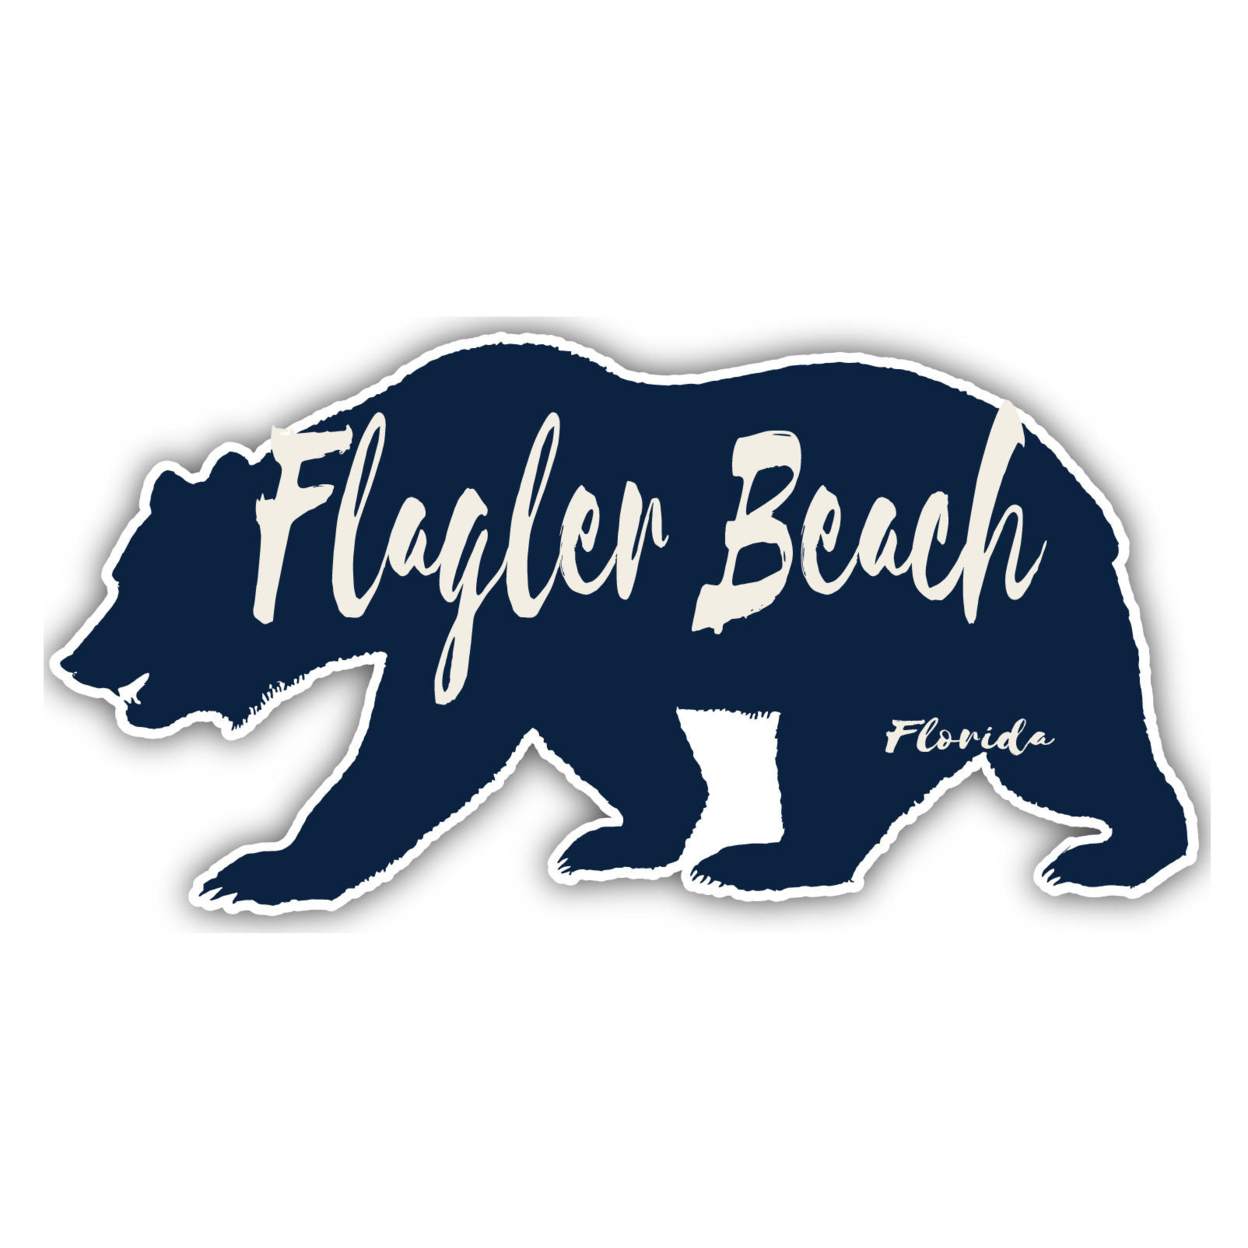 Flagler Beach Florida Souvenir Decorative Stickers (Choose Theme And Size) - 4-Pack, 2-Inch, Tent